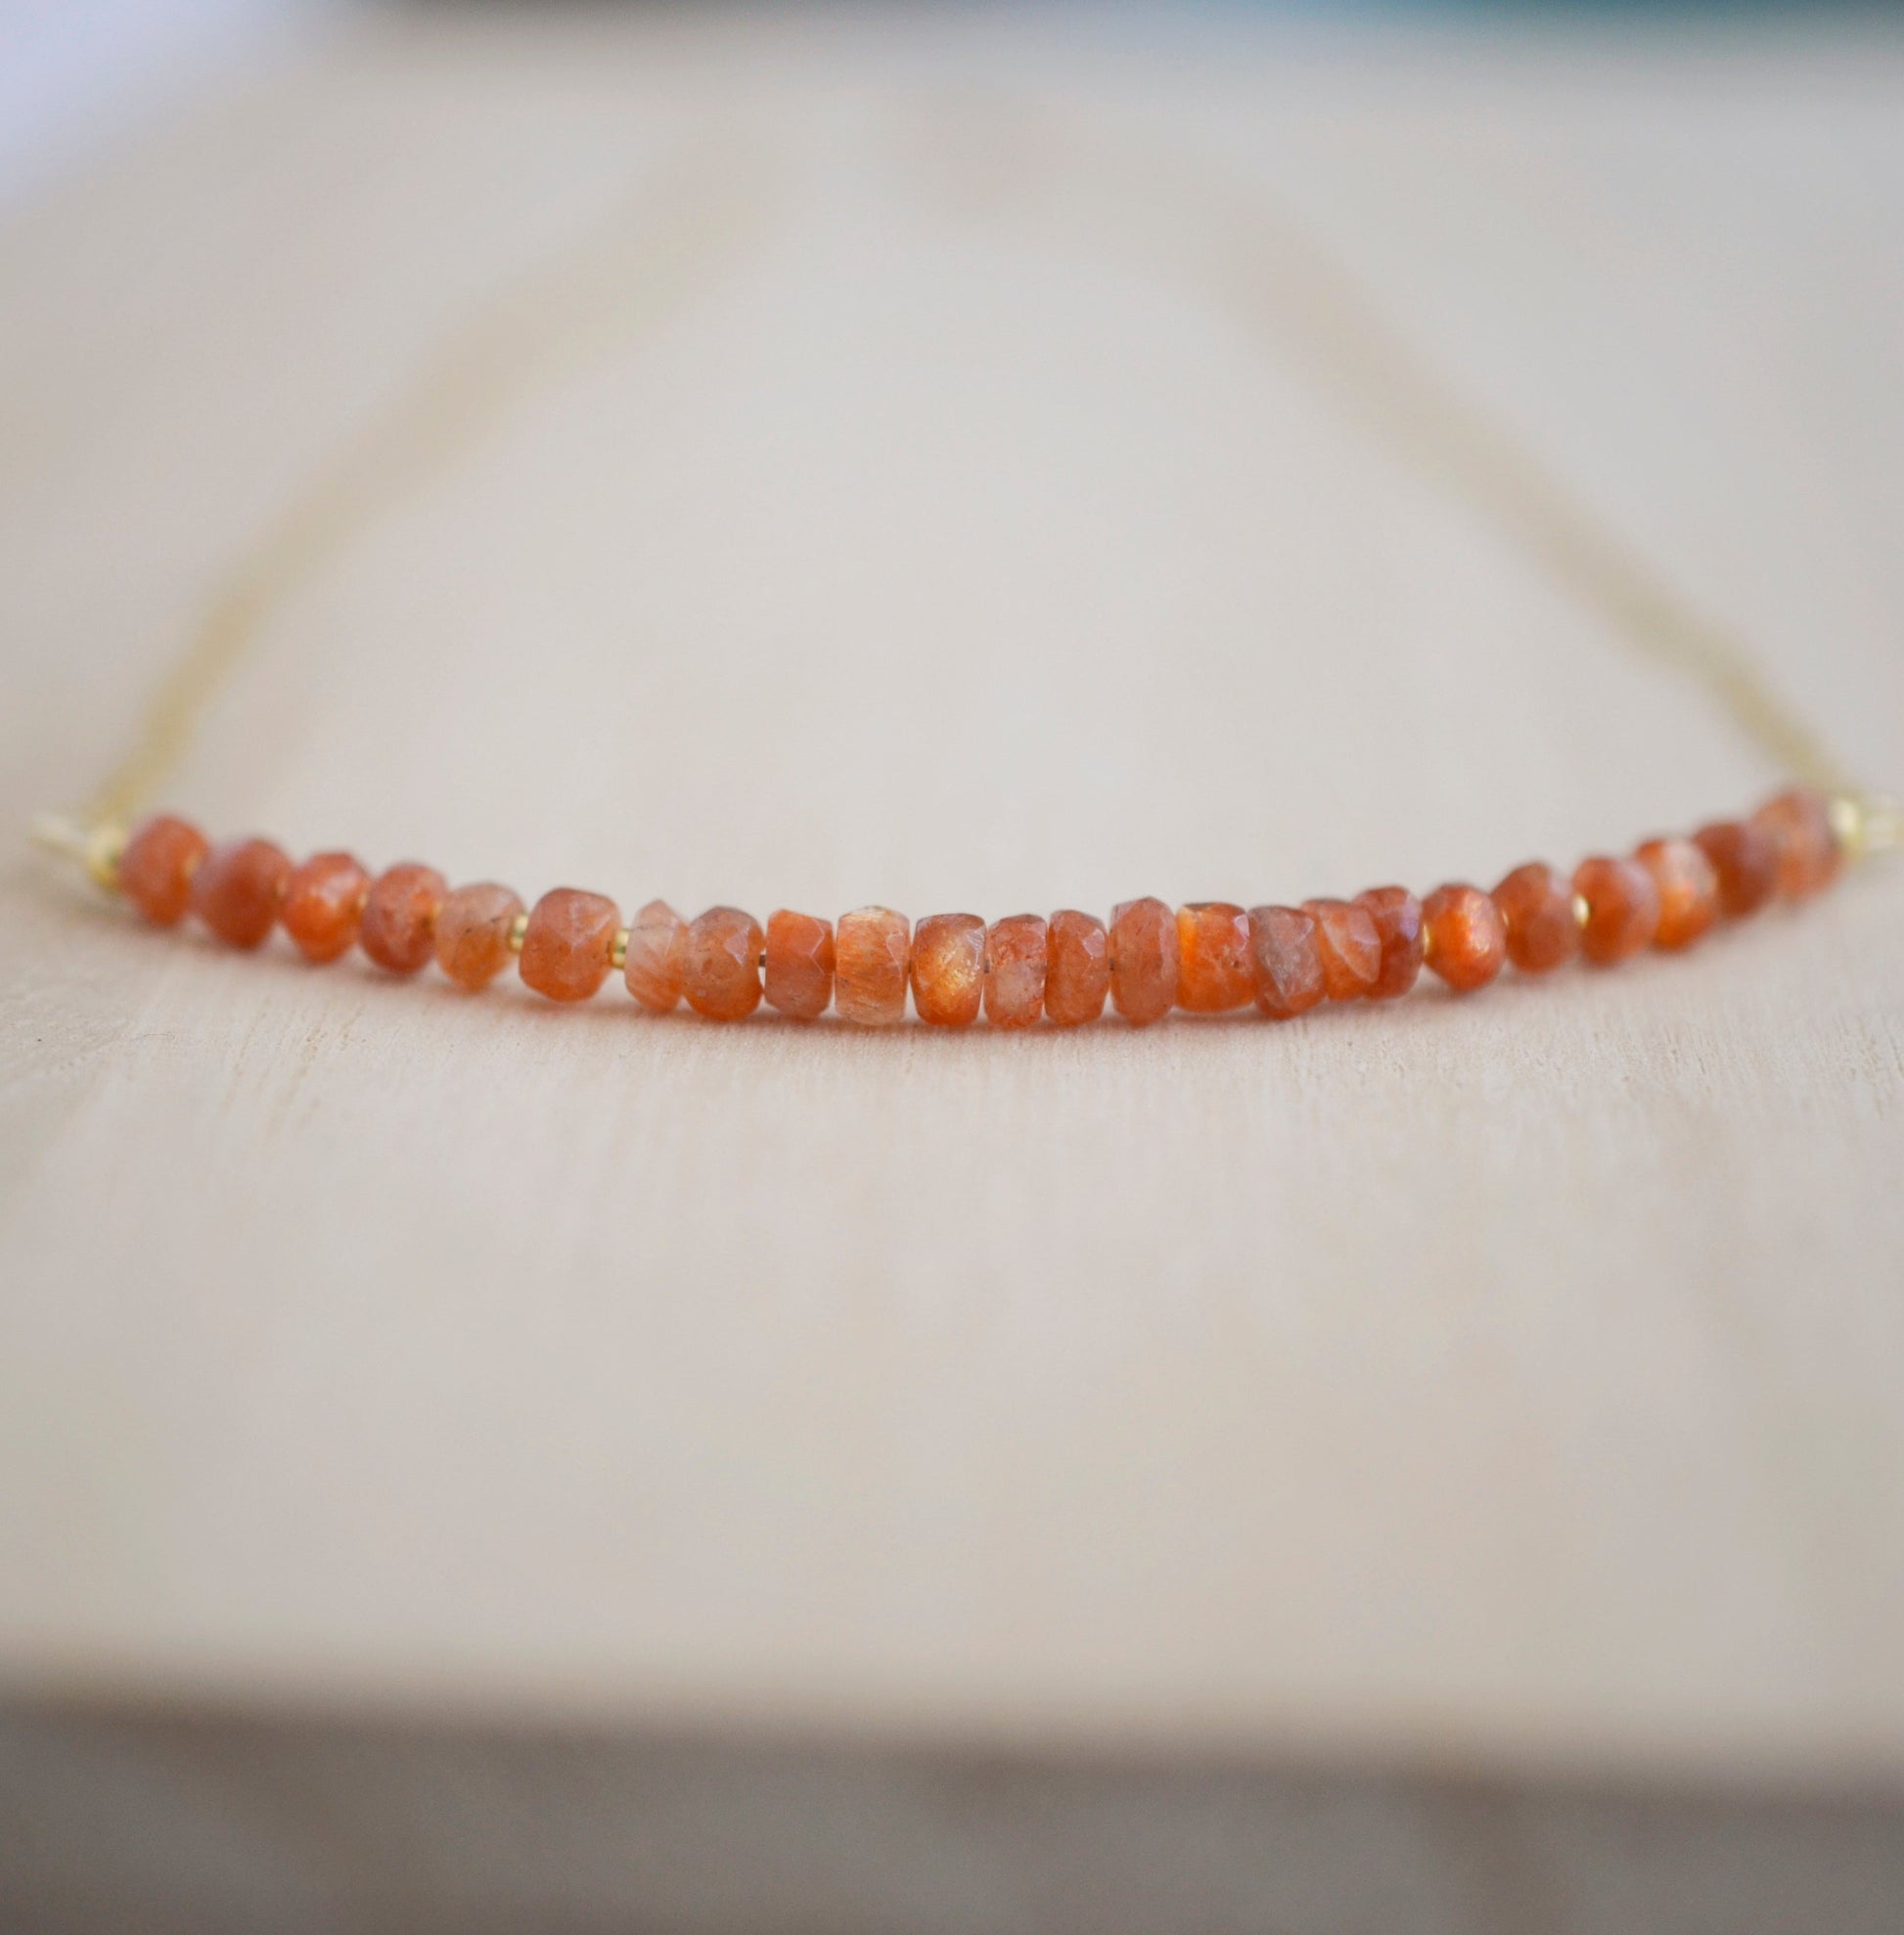 Sunstone Necklace with small faceted sunstone gems set onto a sterling silver or gold filled chain. 